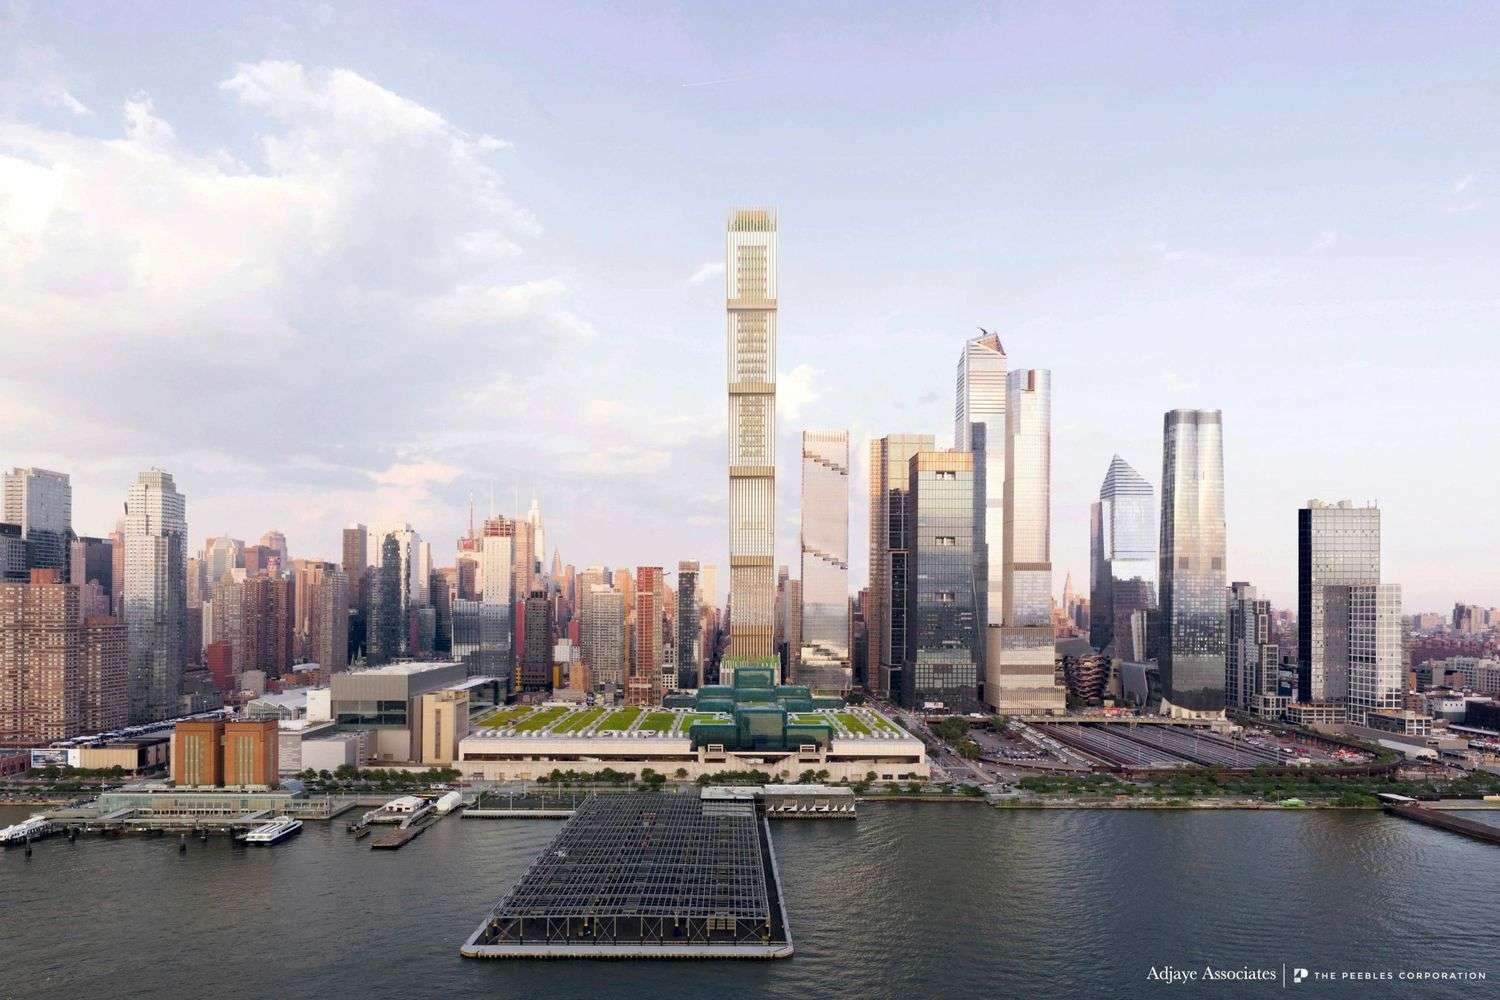 Design proposal submitted by Adjaye Associates for the tallest skyscraper at Hudson Yards